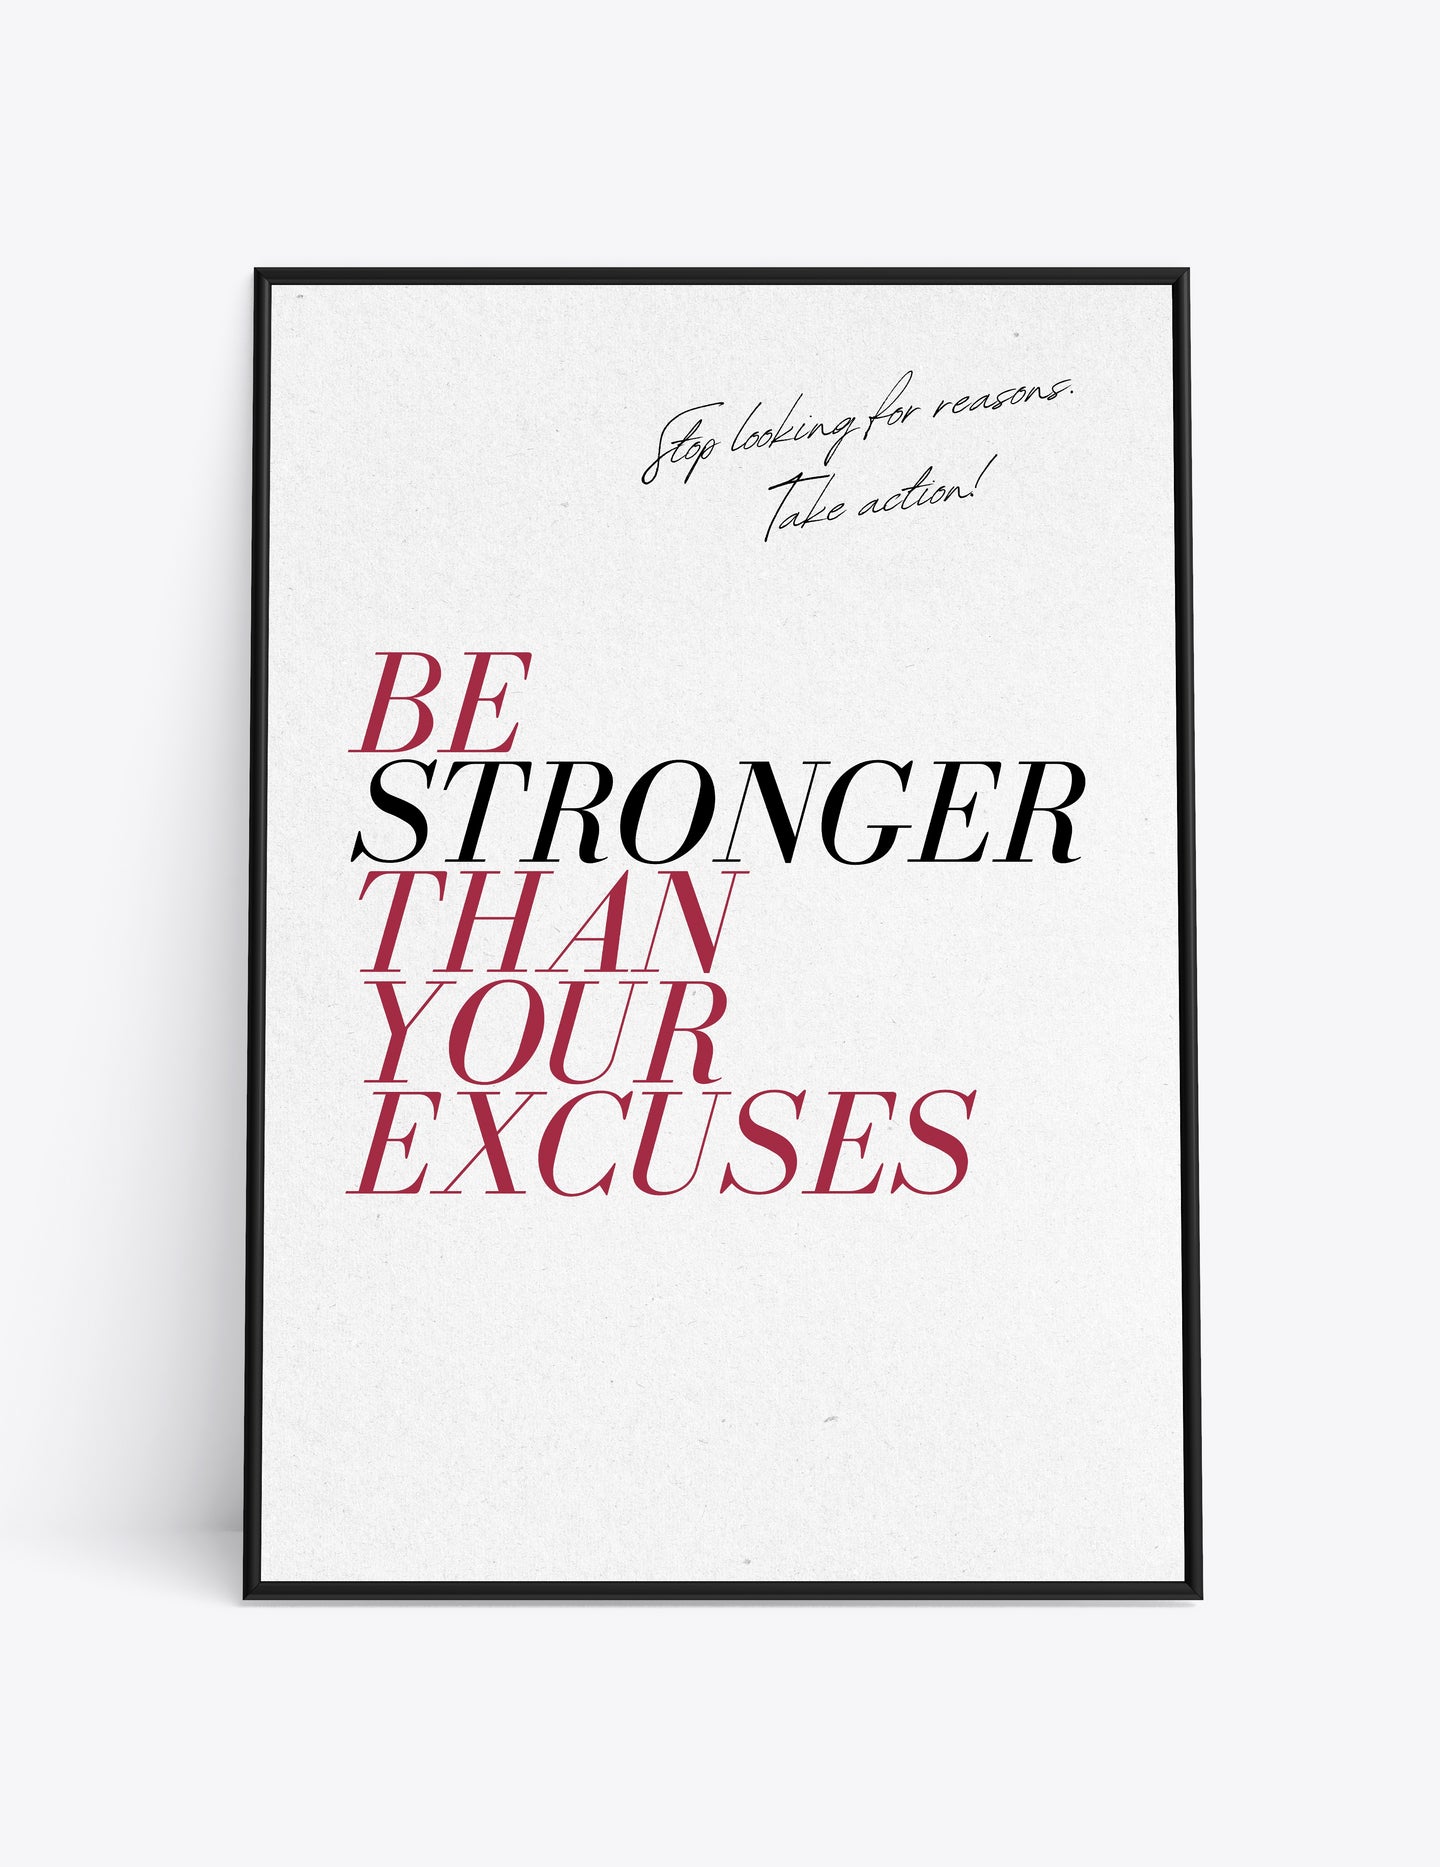 BE STRONGER THAN YOUR EXCUSES.